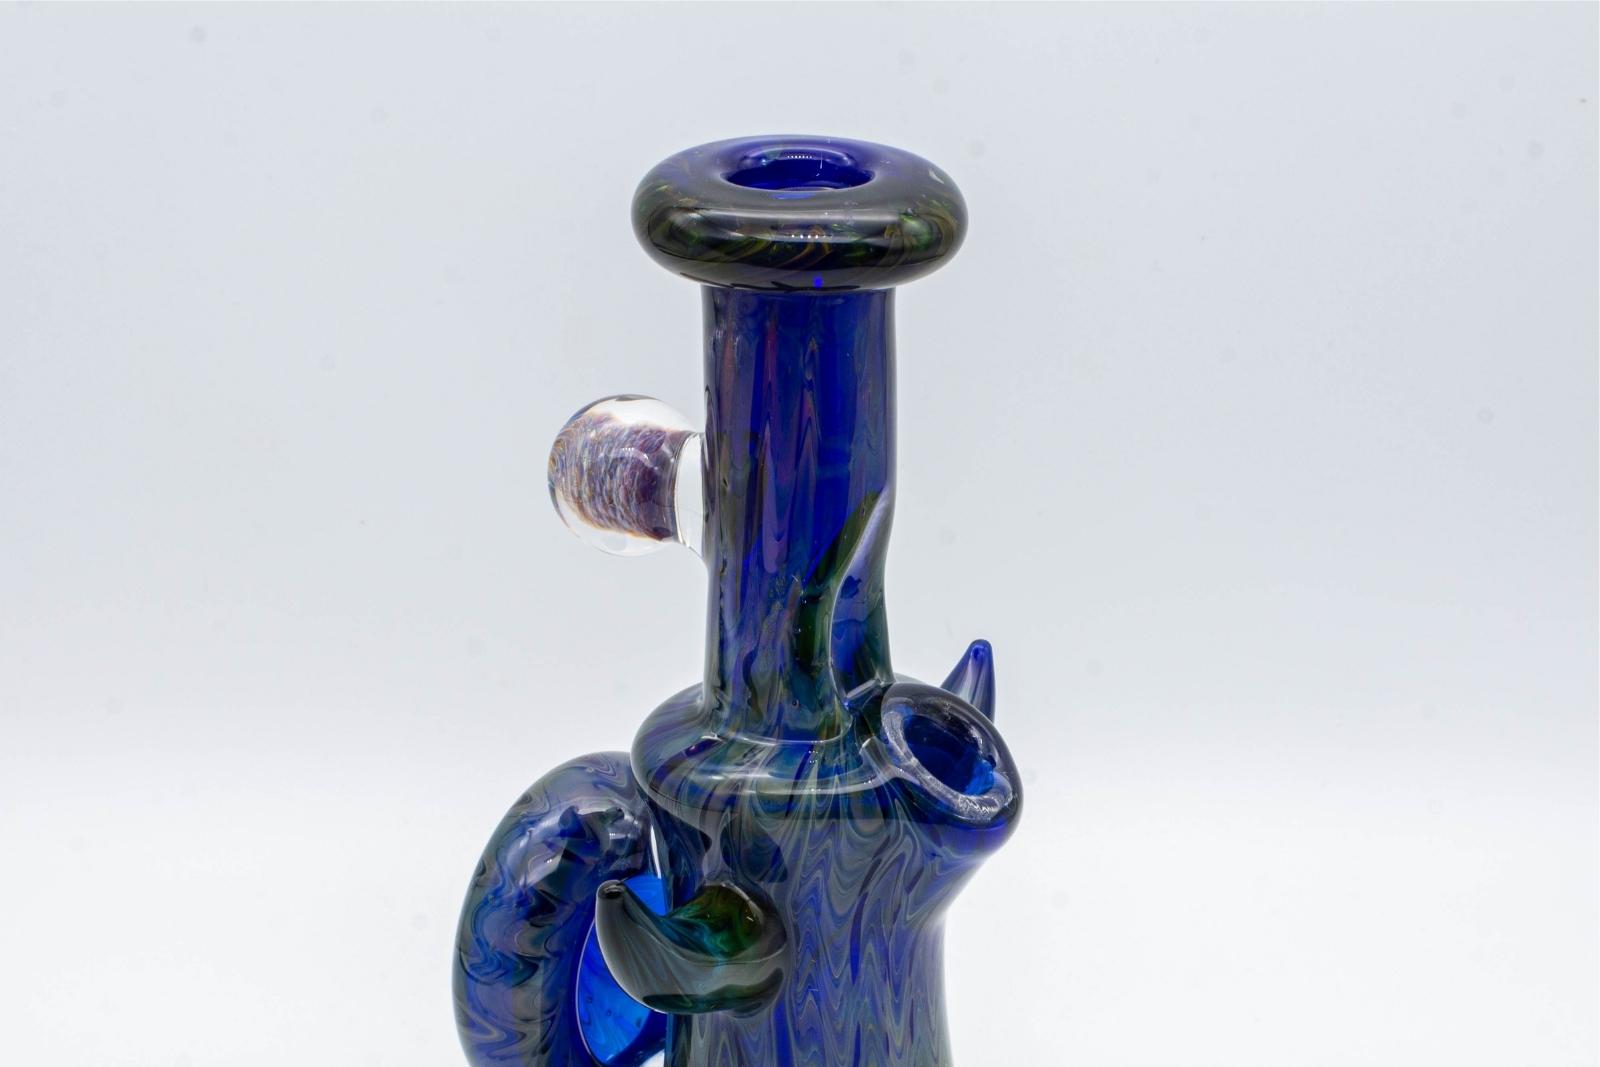 A cobalt and gold fumed, 6-inch jammer, made by GooMan Glass, on a white background